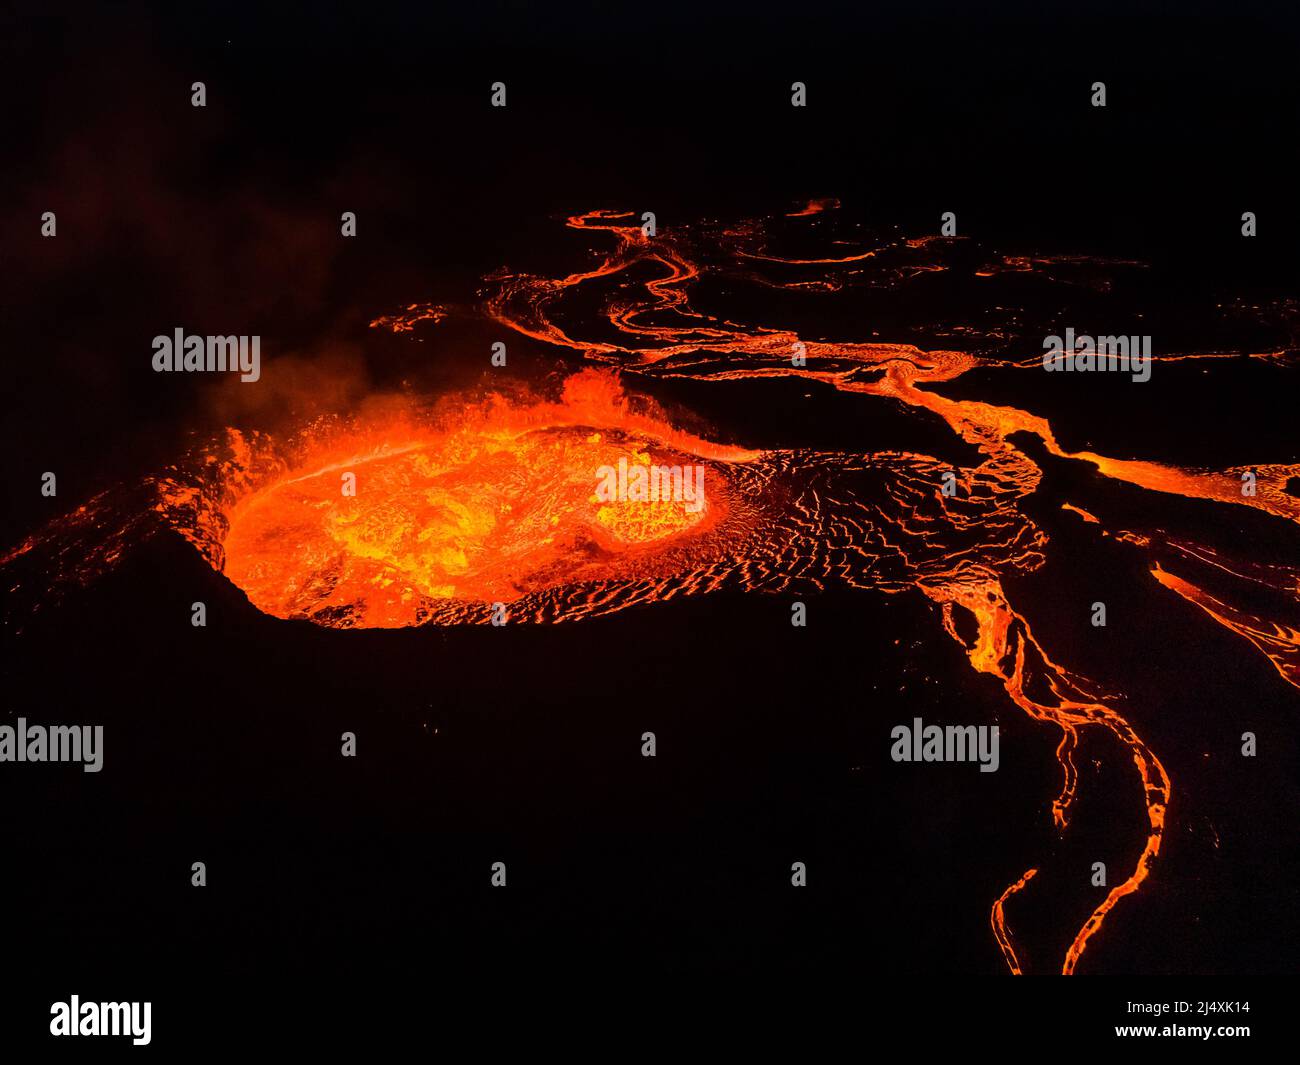 Impressive aerial view of the exploding red lava from the Active Volcano in Iceland Stock Photo